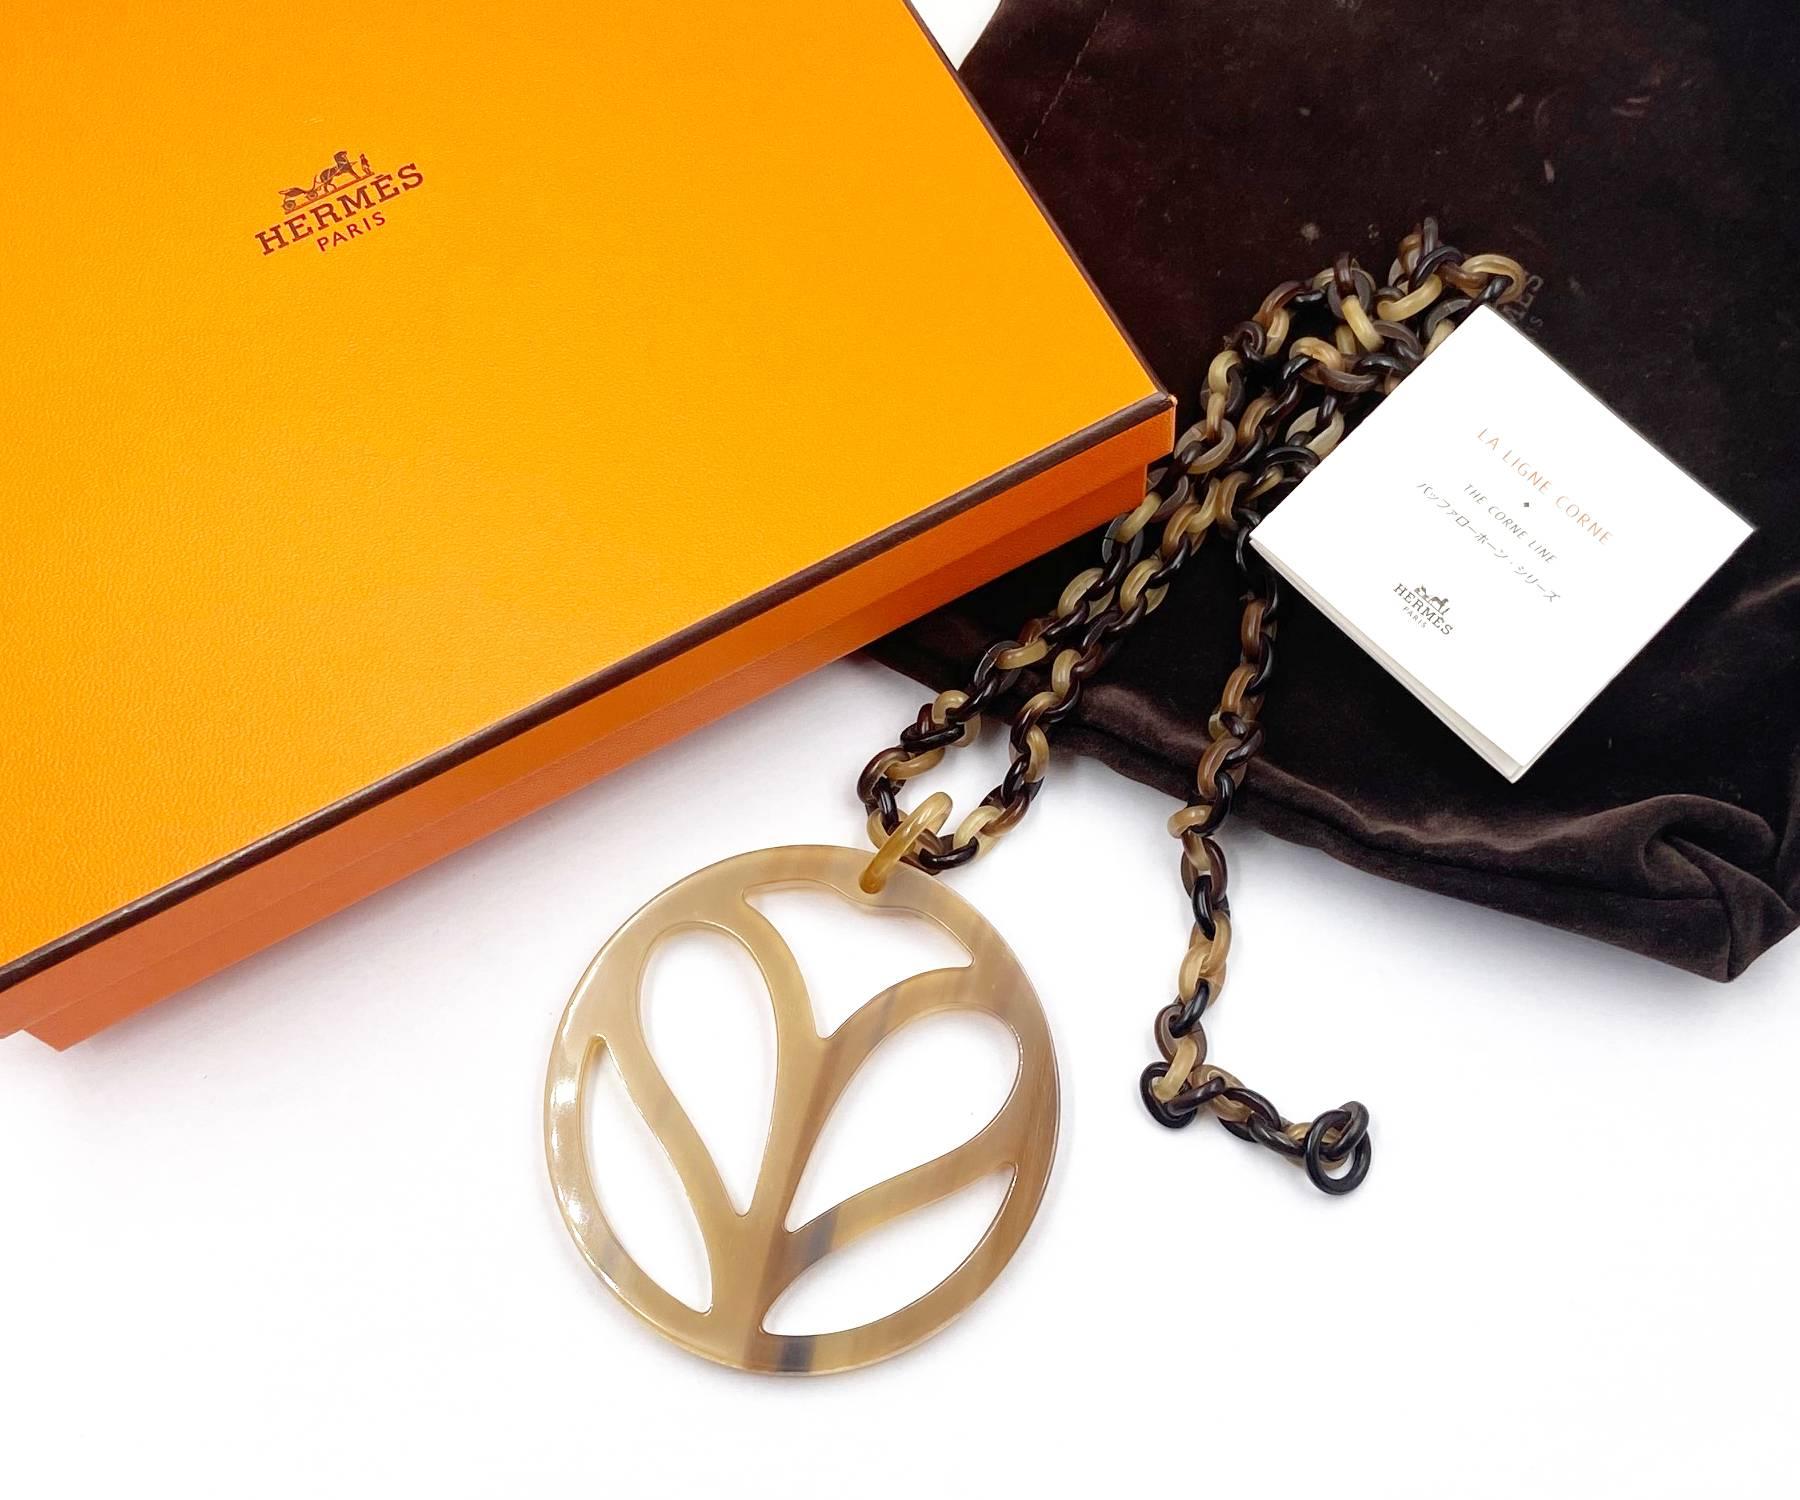 Hermes Brown Horn Large Pendant Necklace

*Marked Hermes
*Comes with the original box, dustbag and booklet

-The chain is approximately 20″ to 26″.
-The pendant is approximately 2.9″ x 2.9″.
-Very classic and pretty
-In a good condition

2020-31035